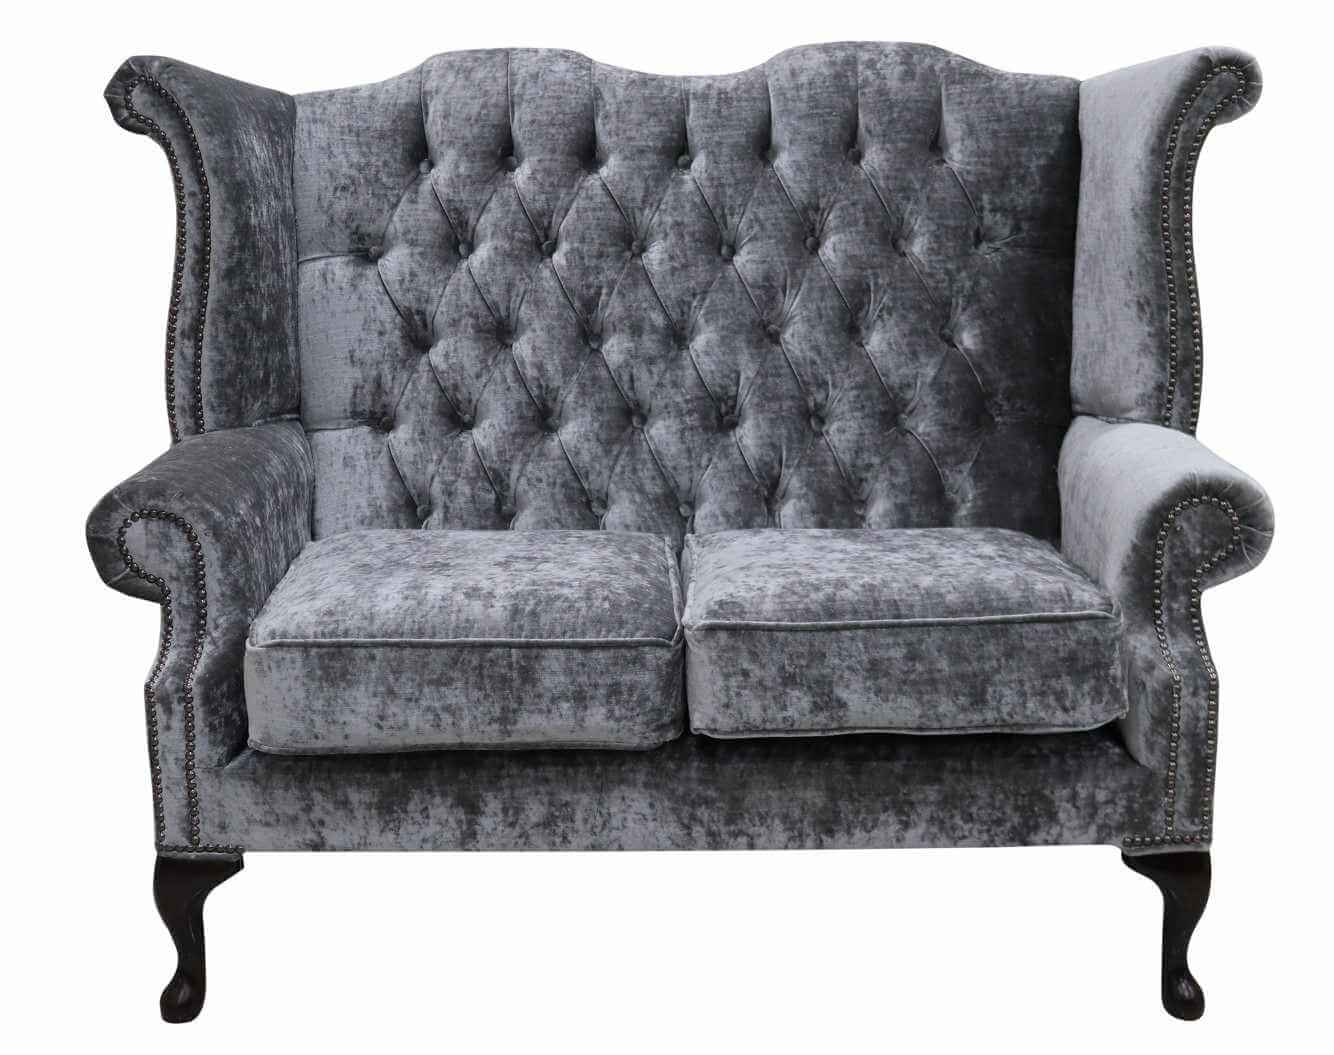 Elegant Neutrals: Exploring Grey Options for Chesterfield Sofas  %Post Title